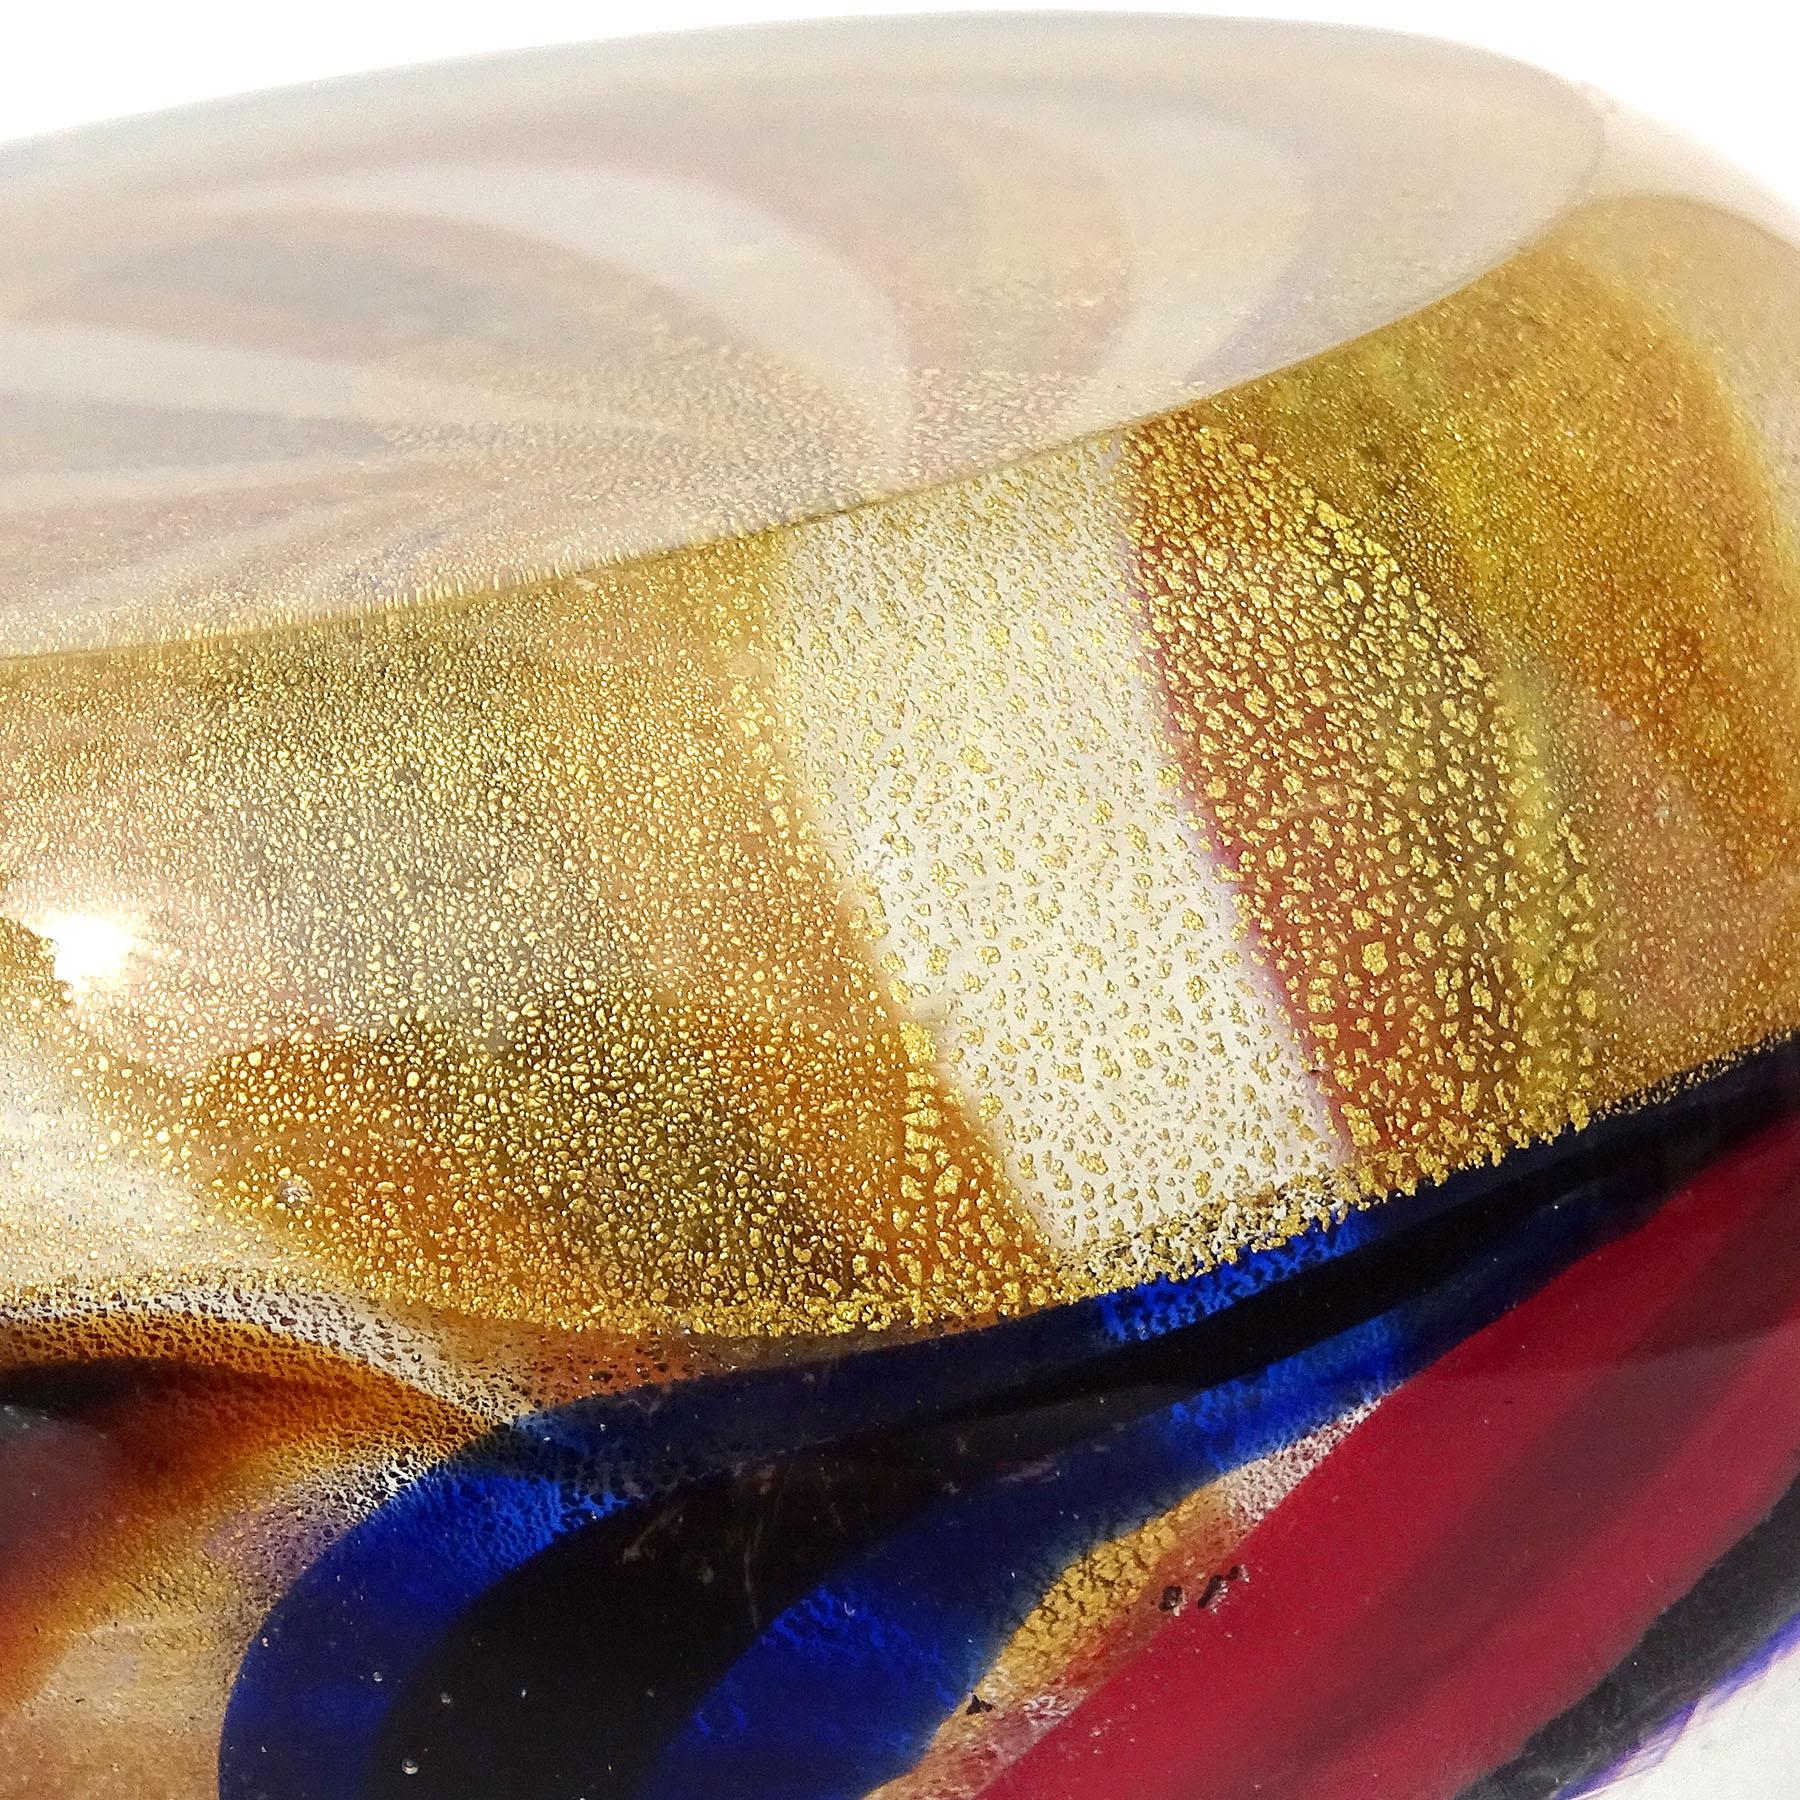 Barovier Toso Murano Blue Orange Red Gold Flecks Italian Art Glass Paperweight In Good Condition For Sale In Kissimmee, FL